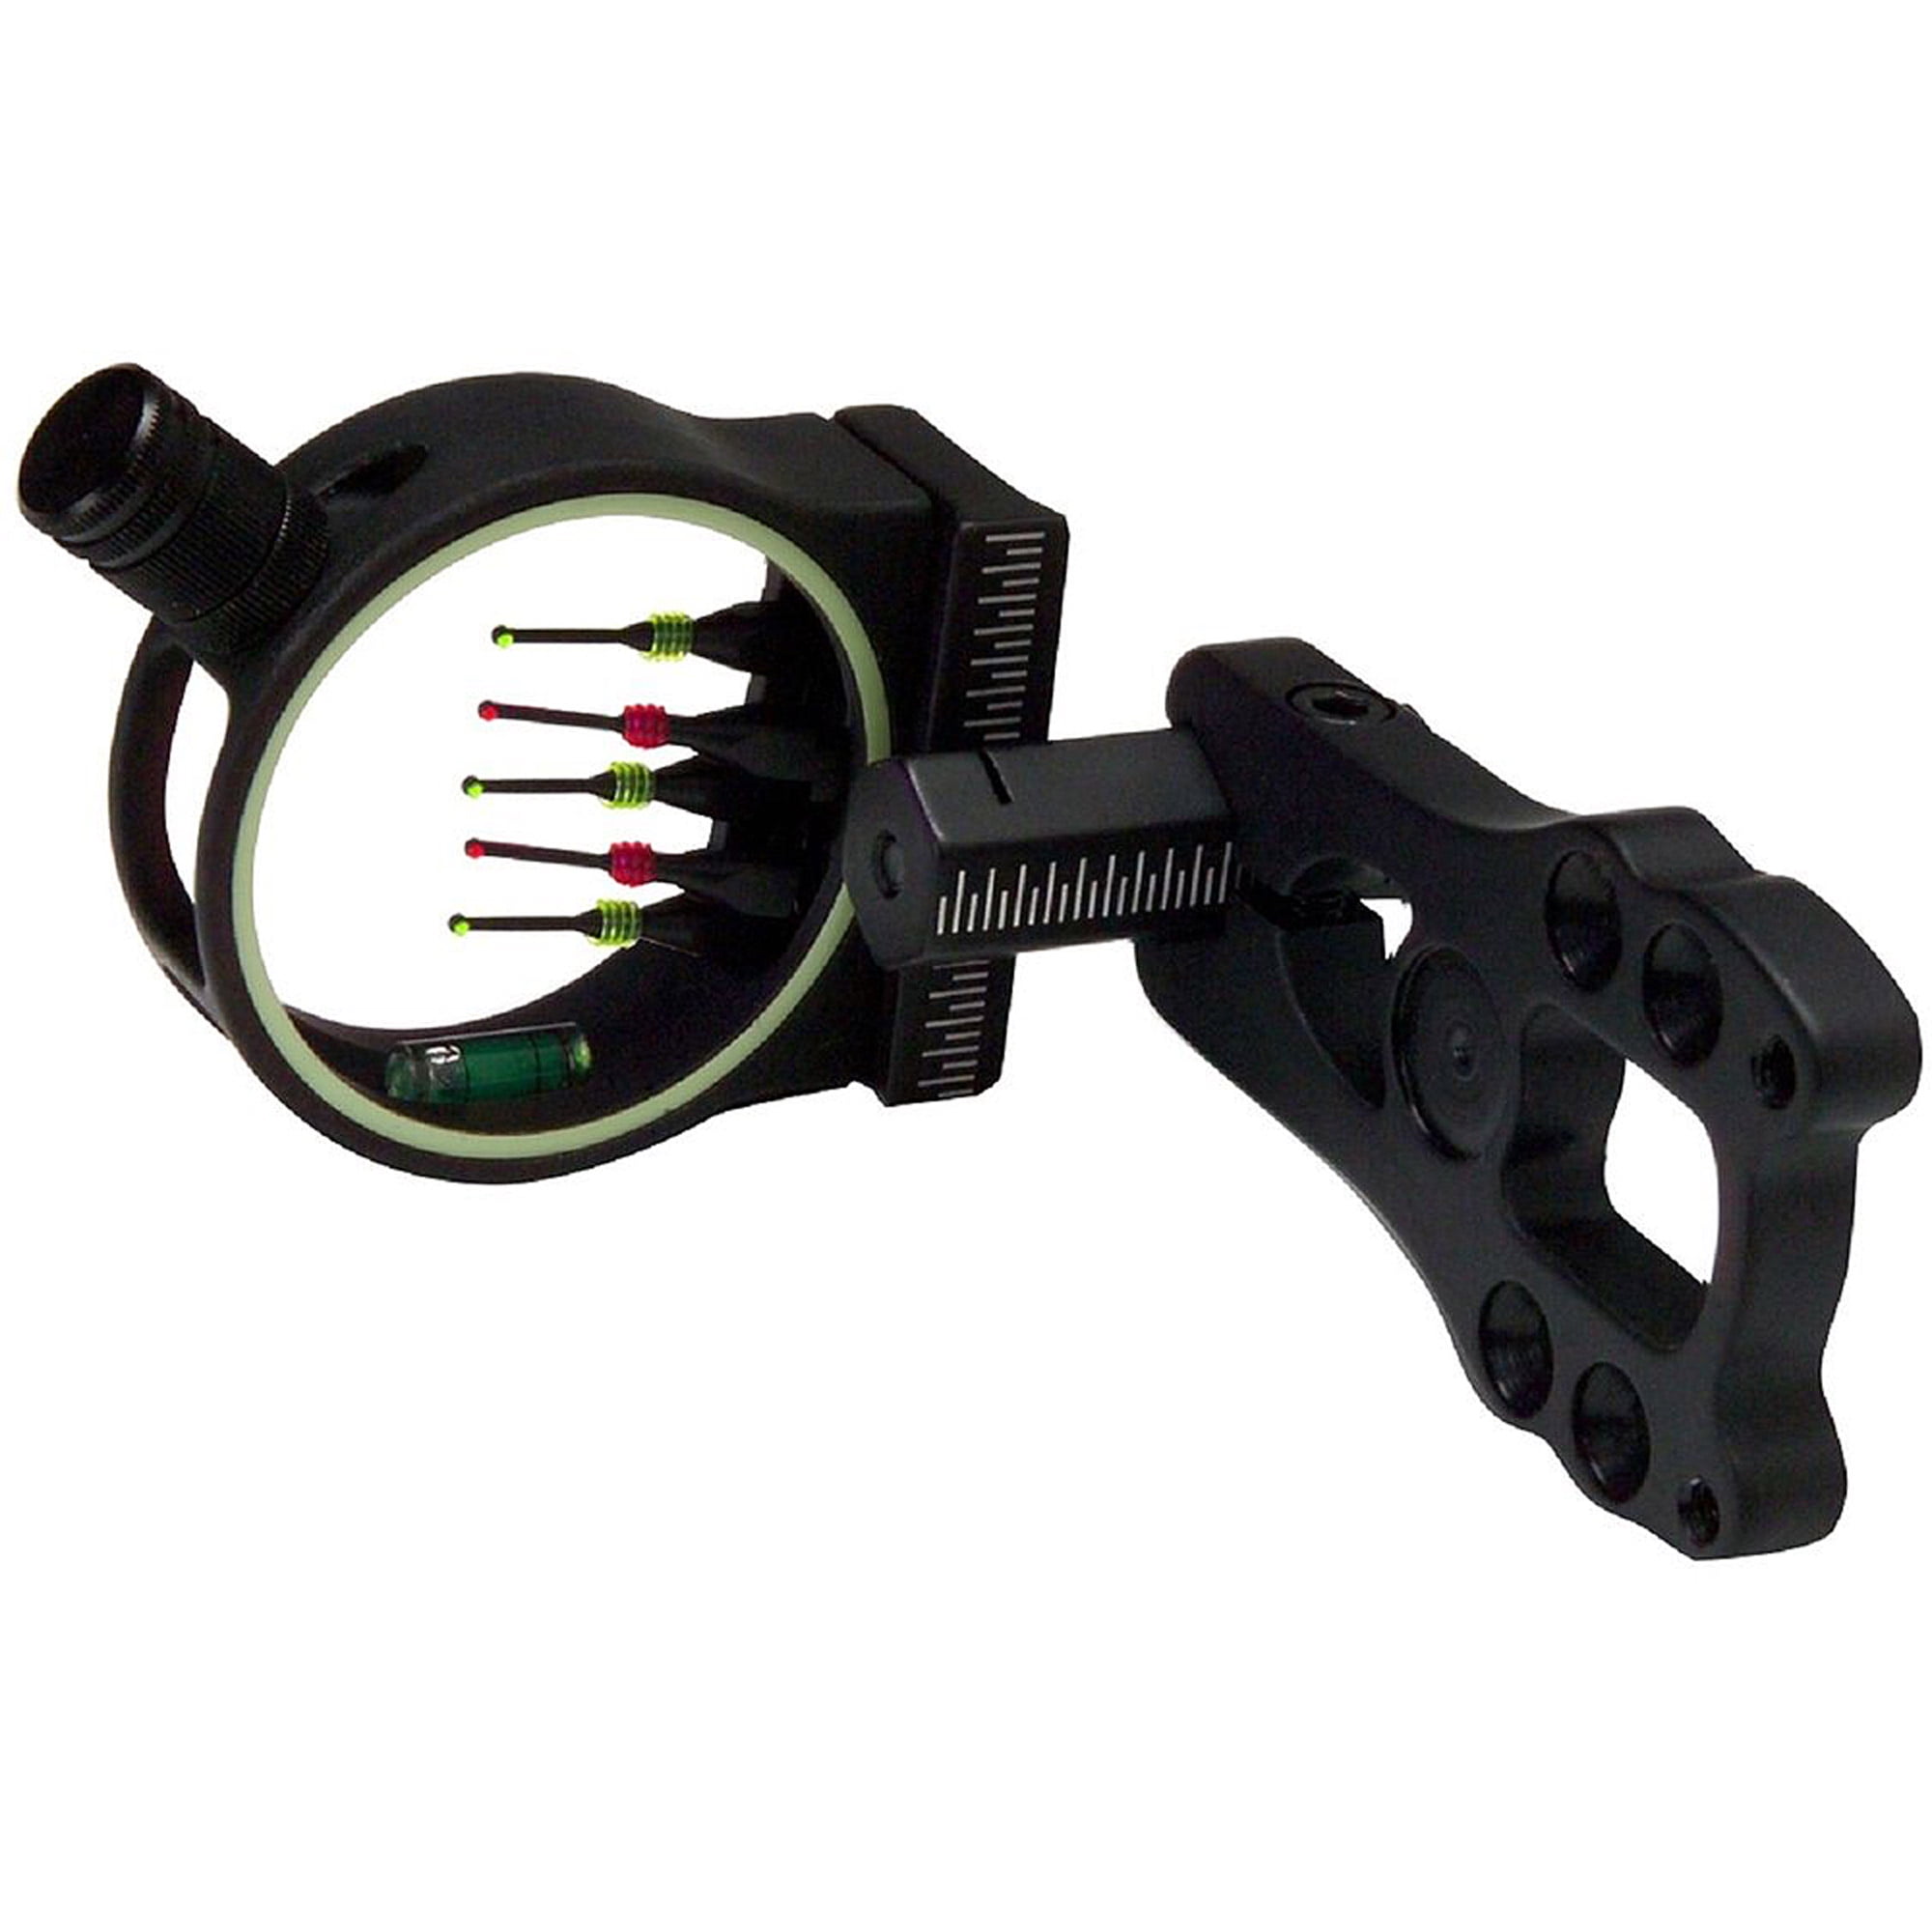 Details about   Archery Compound Bow Sights 5 Optic Fiber Pins Bow Sights with Violet Light 